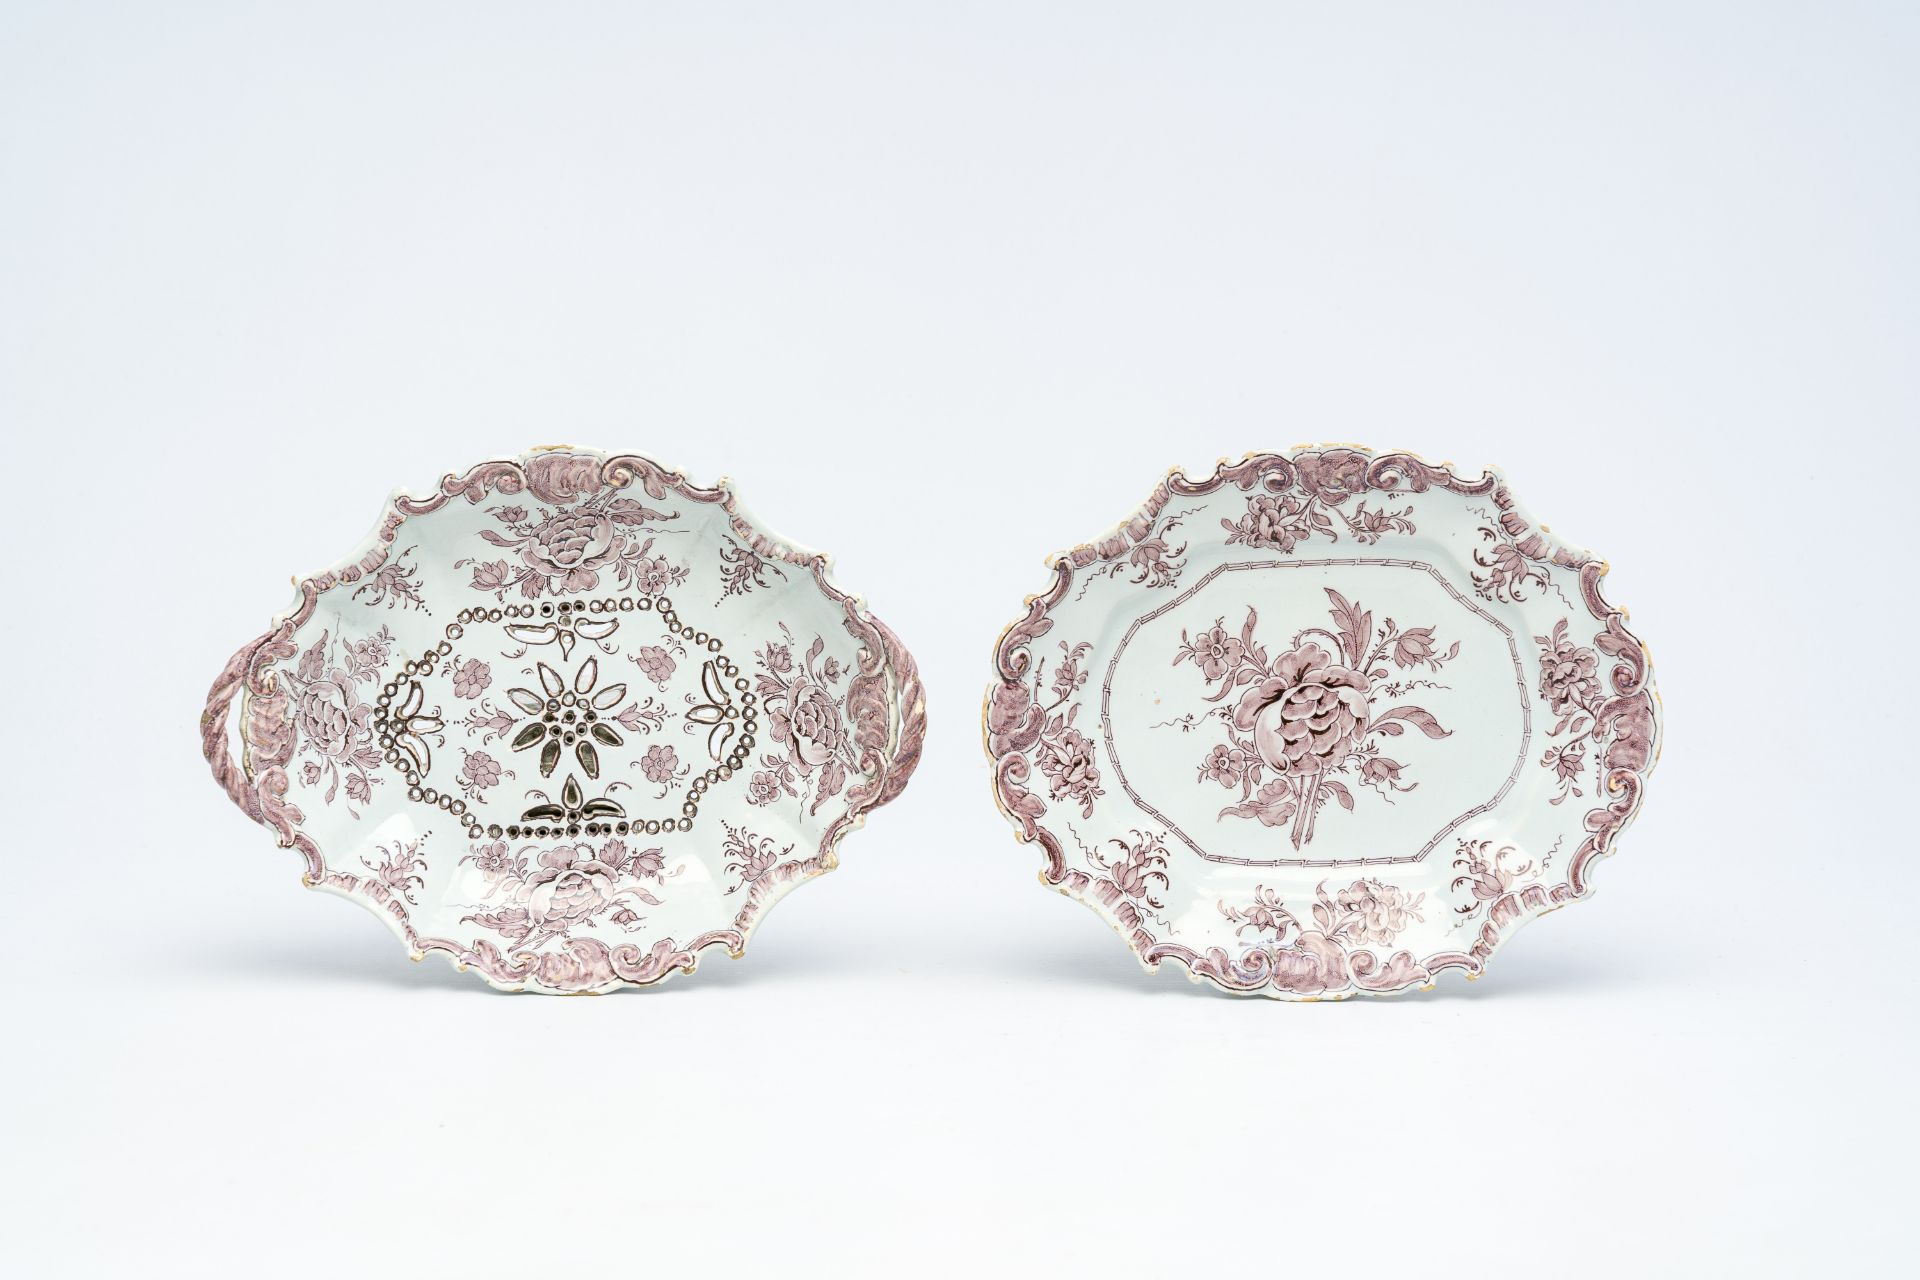 A Dutch Delft manganese strawberry dish on stand, 18th C. - Image 2 of 3